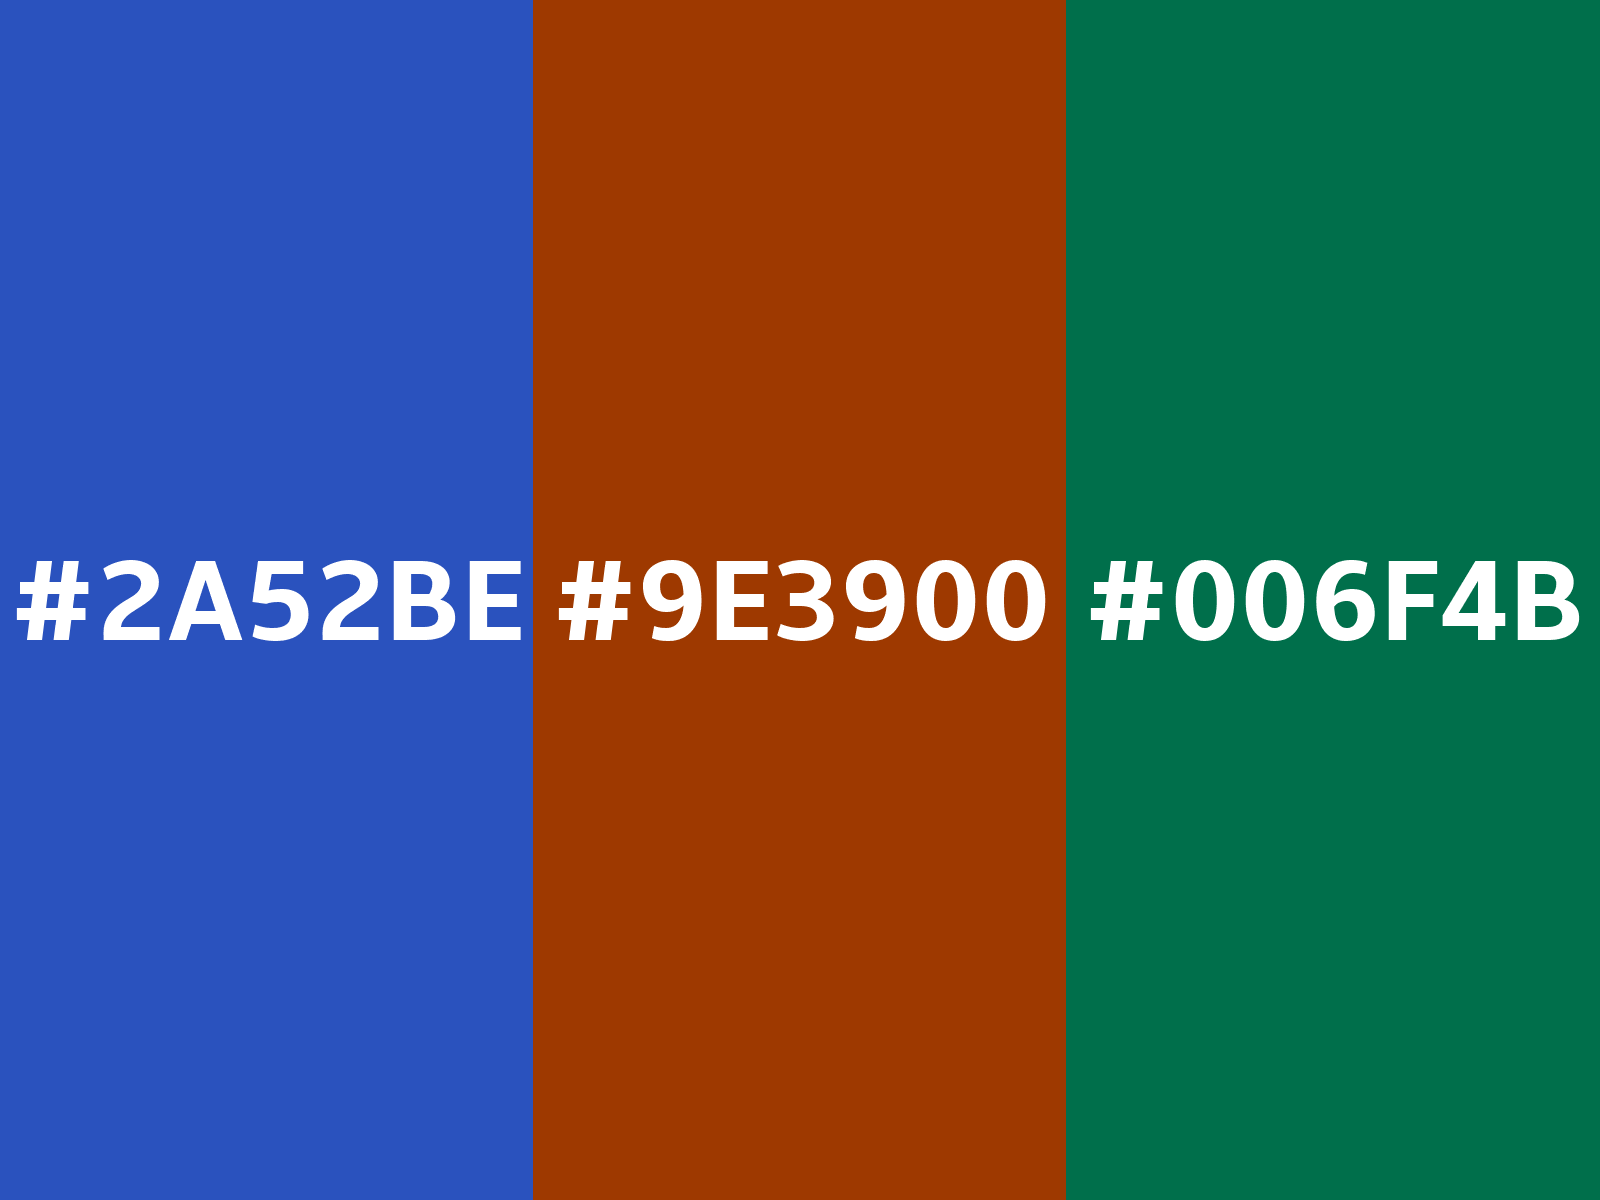 colorswall on X: Shades of Cerulean Blue color #2A52BE hex #2a52be,  #264aab, #224298, #1d3985, #193172, #15295f, #11214c, #0d1939, #081026,  #040813 #colors #palette   /  X